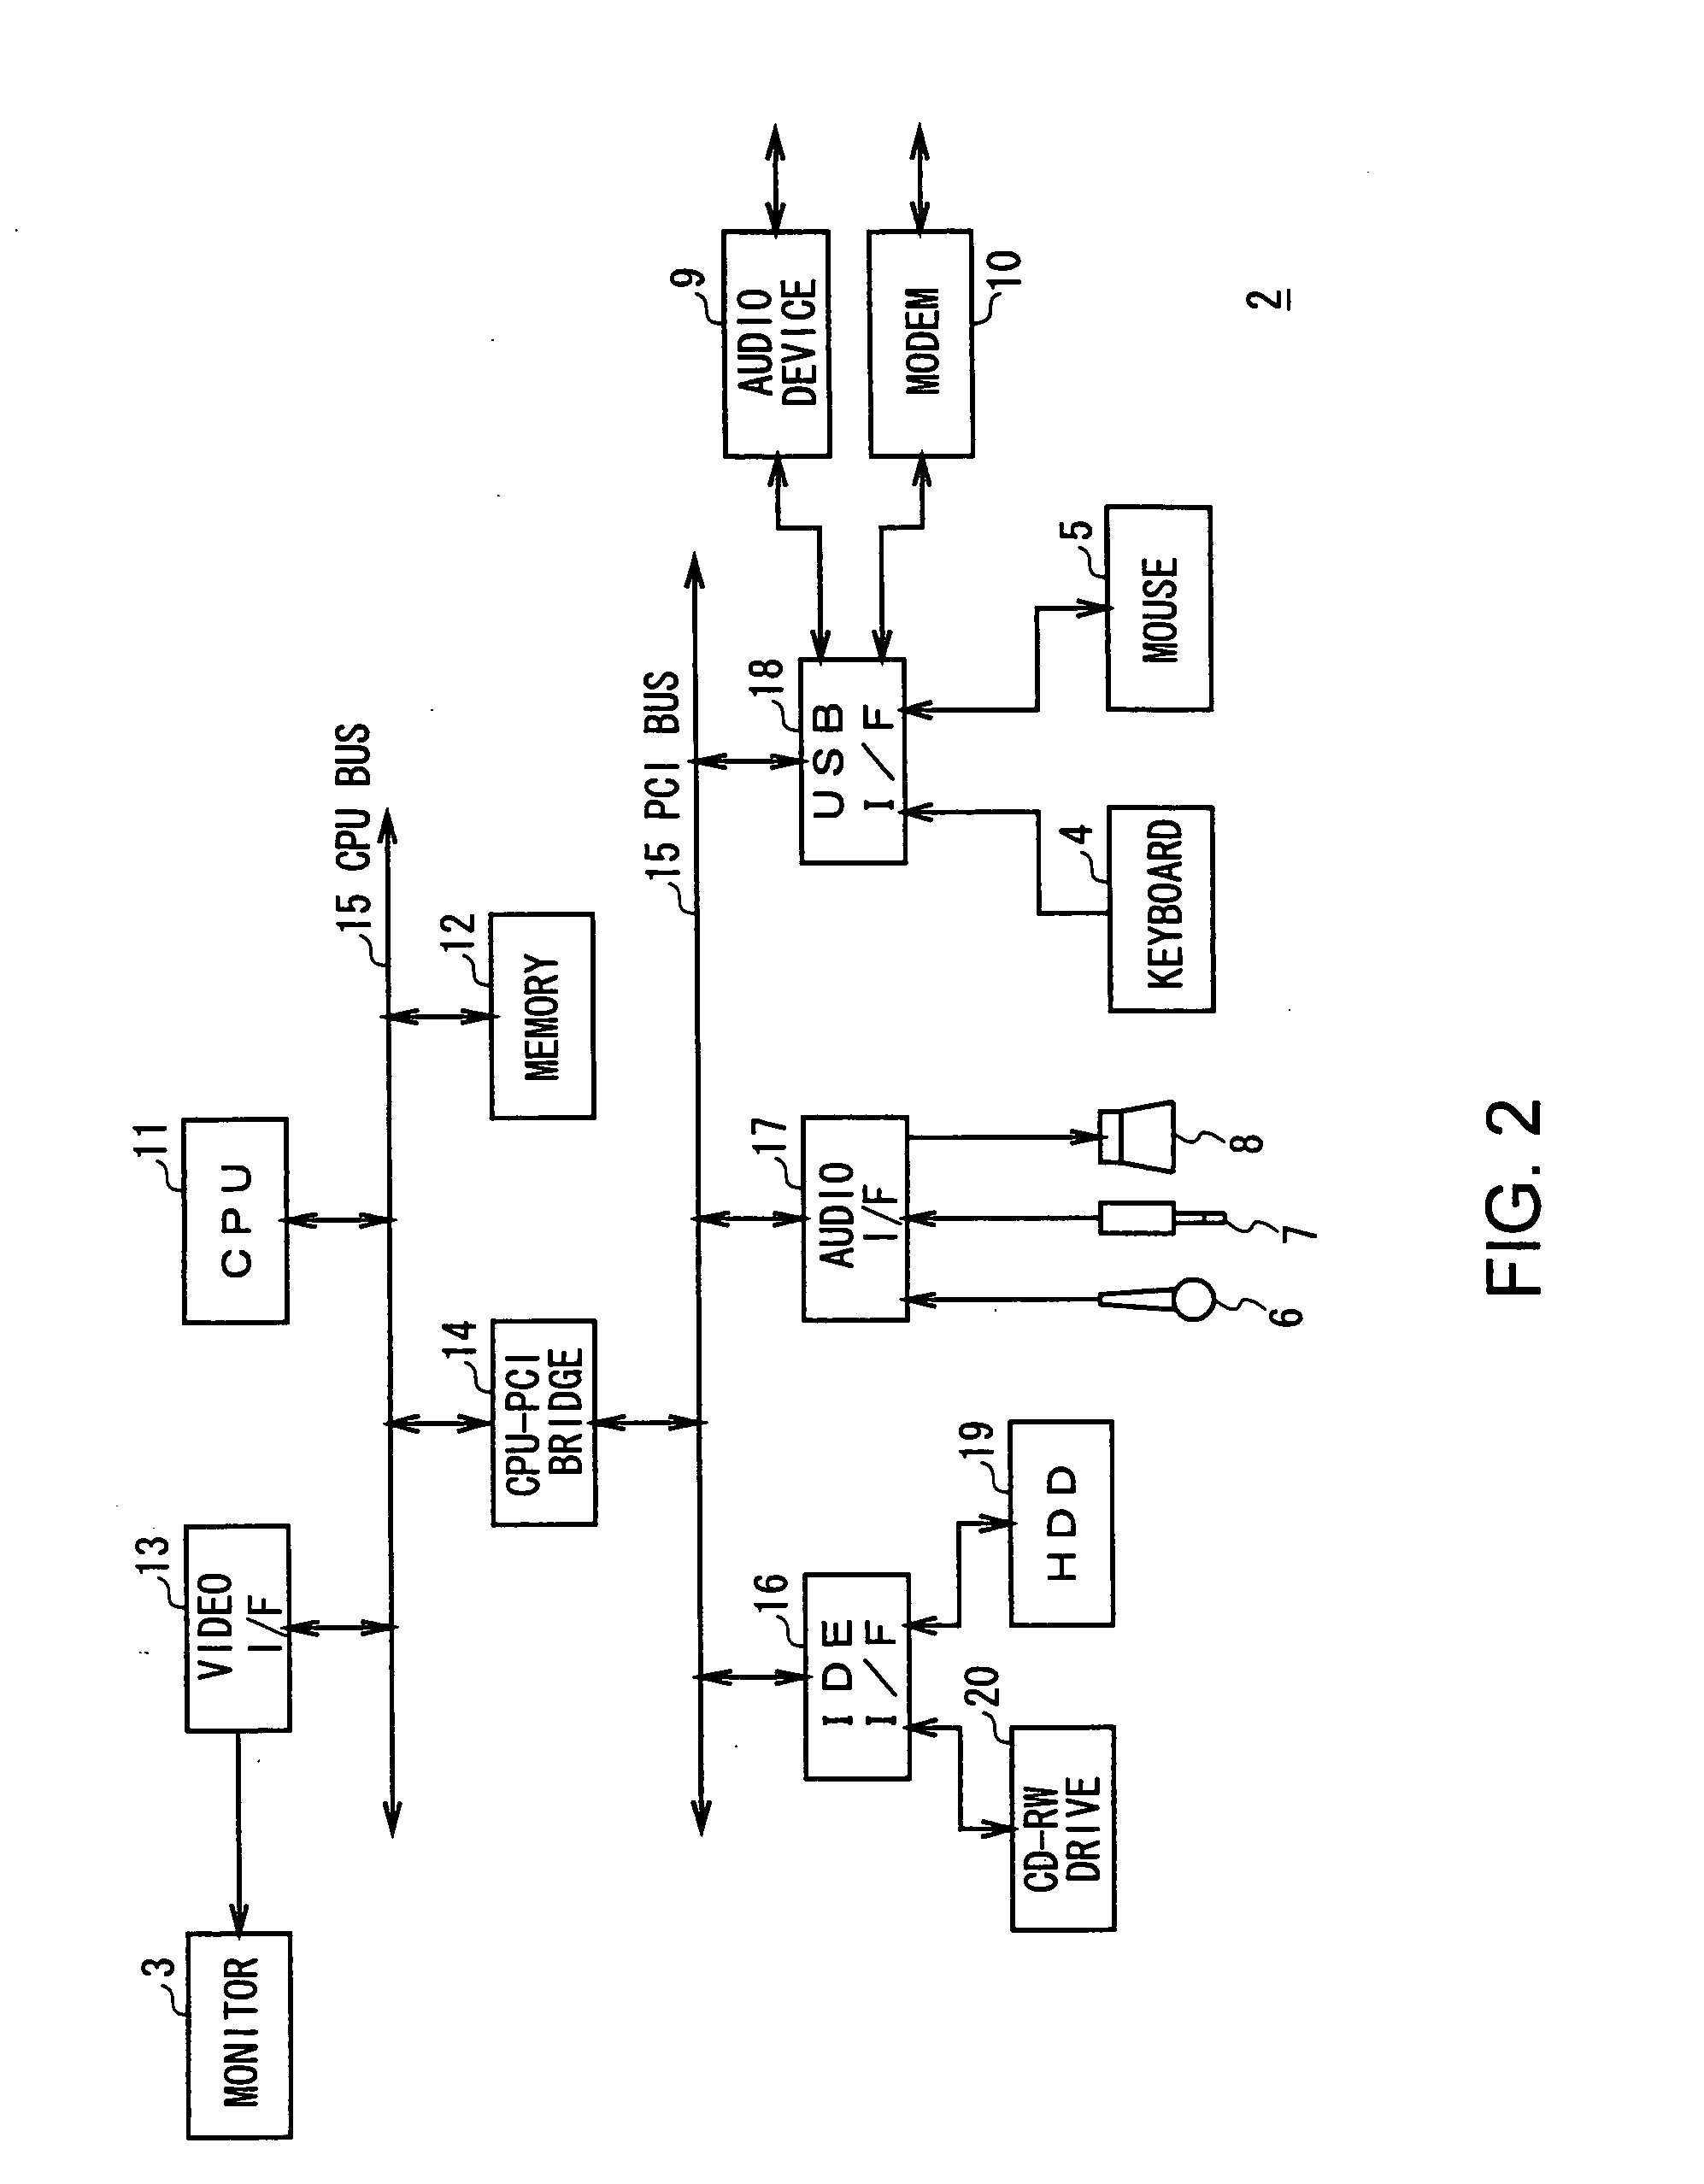 Information processing apparatus for editing data